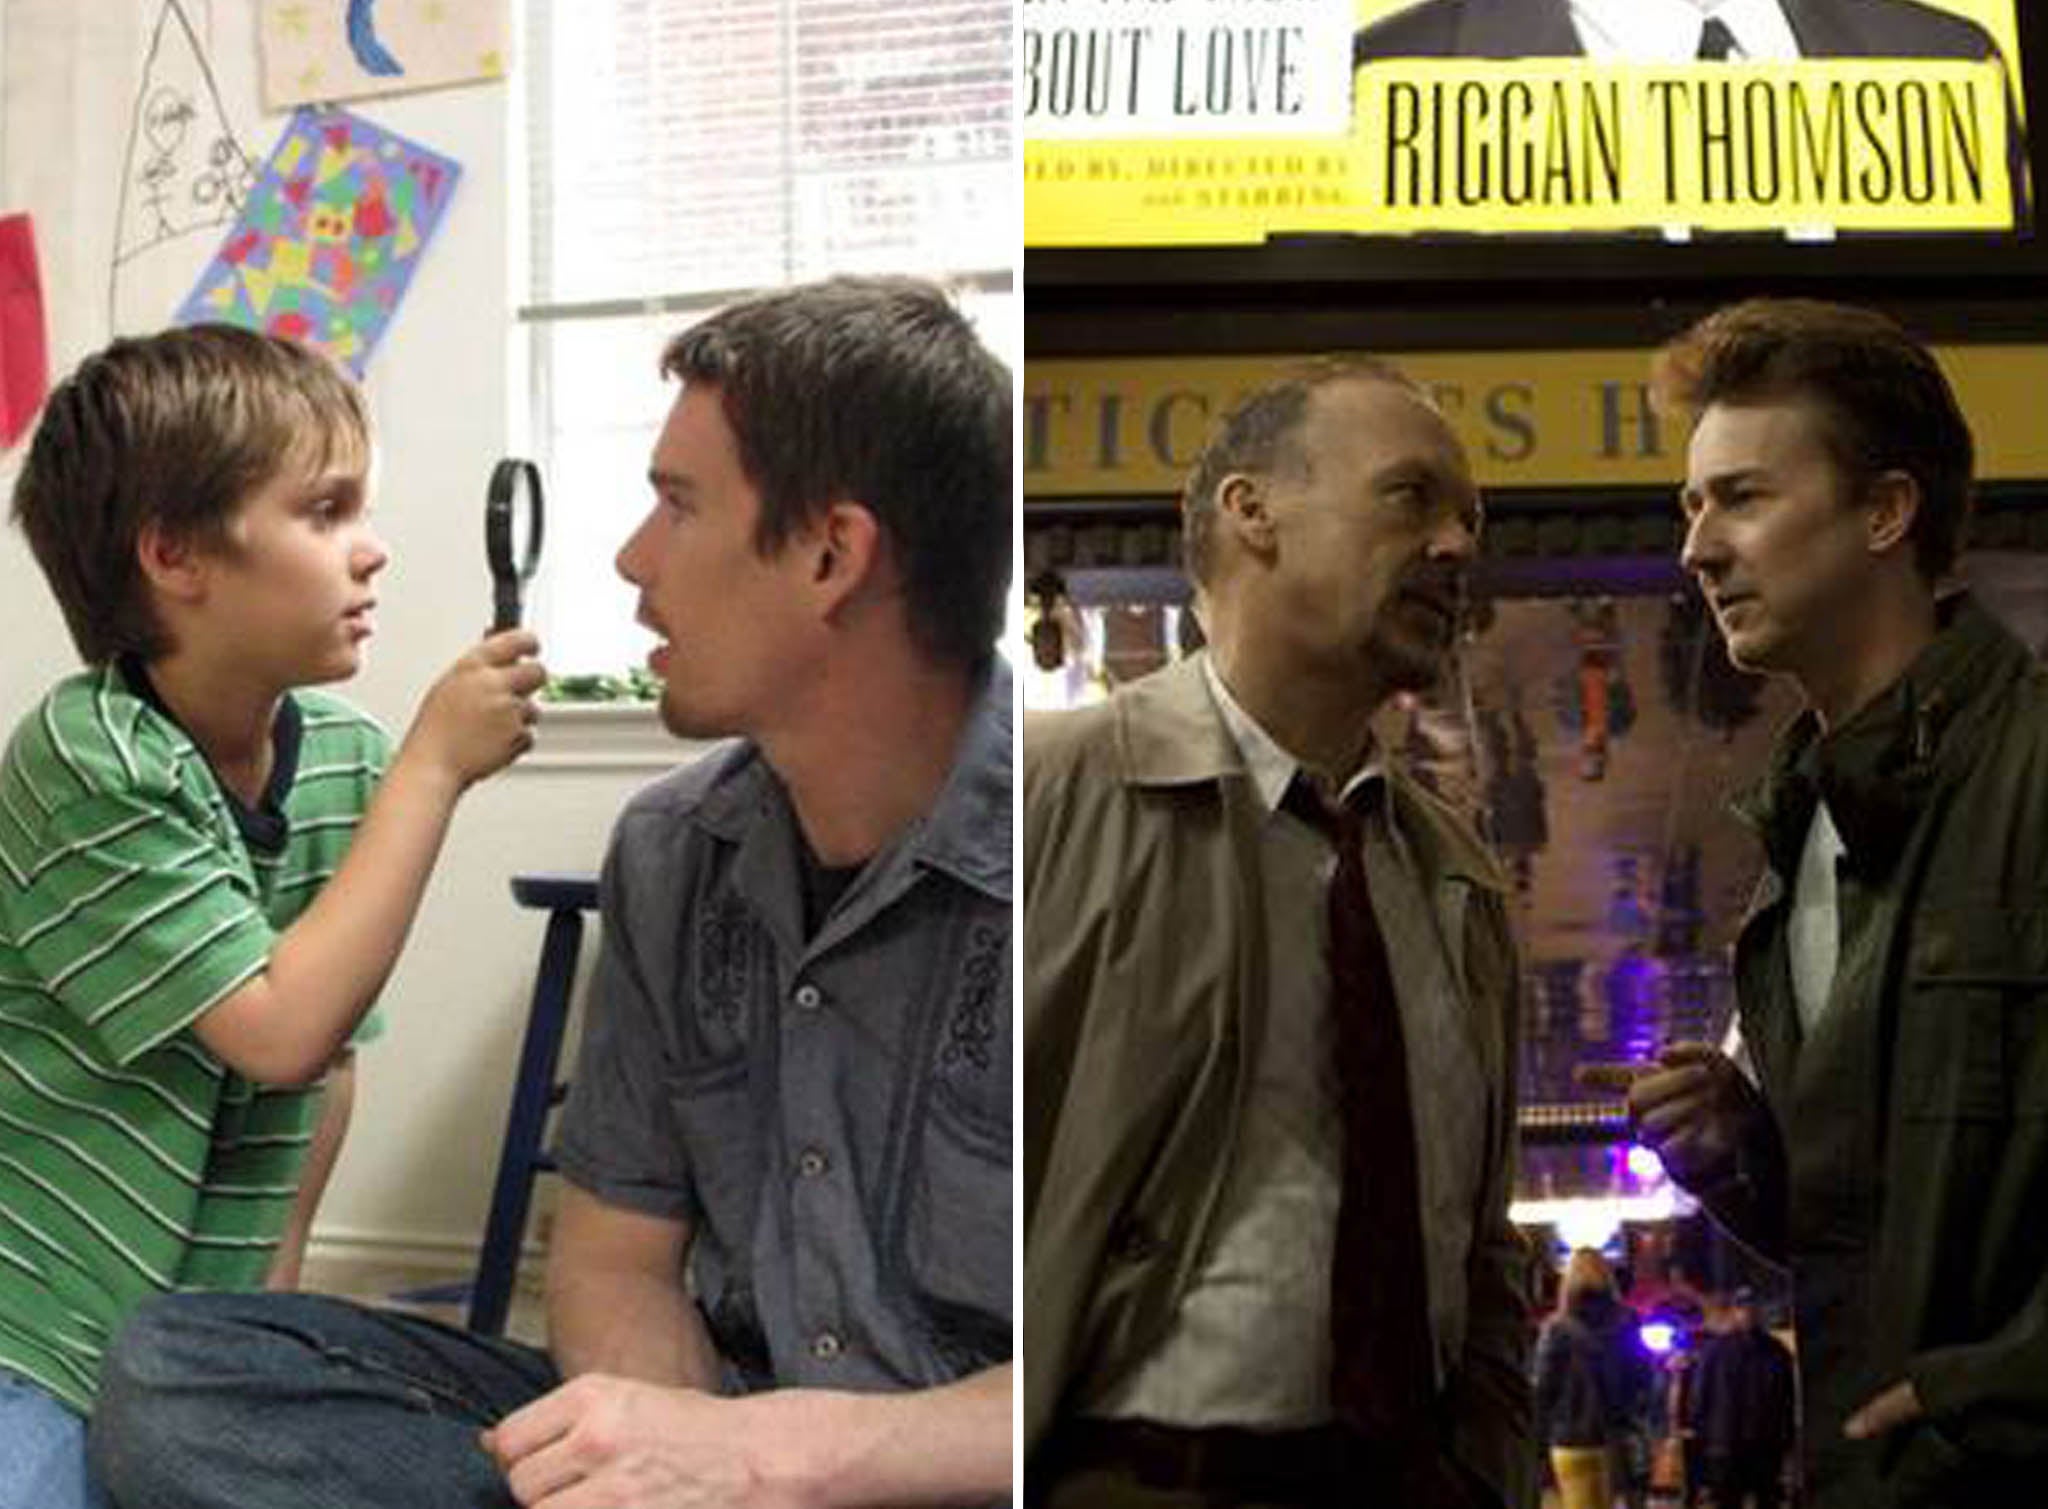 The Oscars race for Best Picture will be the battle between Boyhood and Birdman